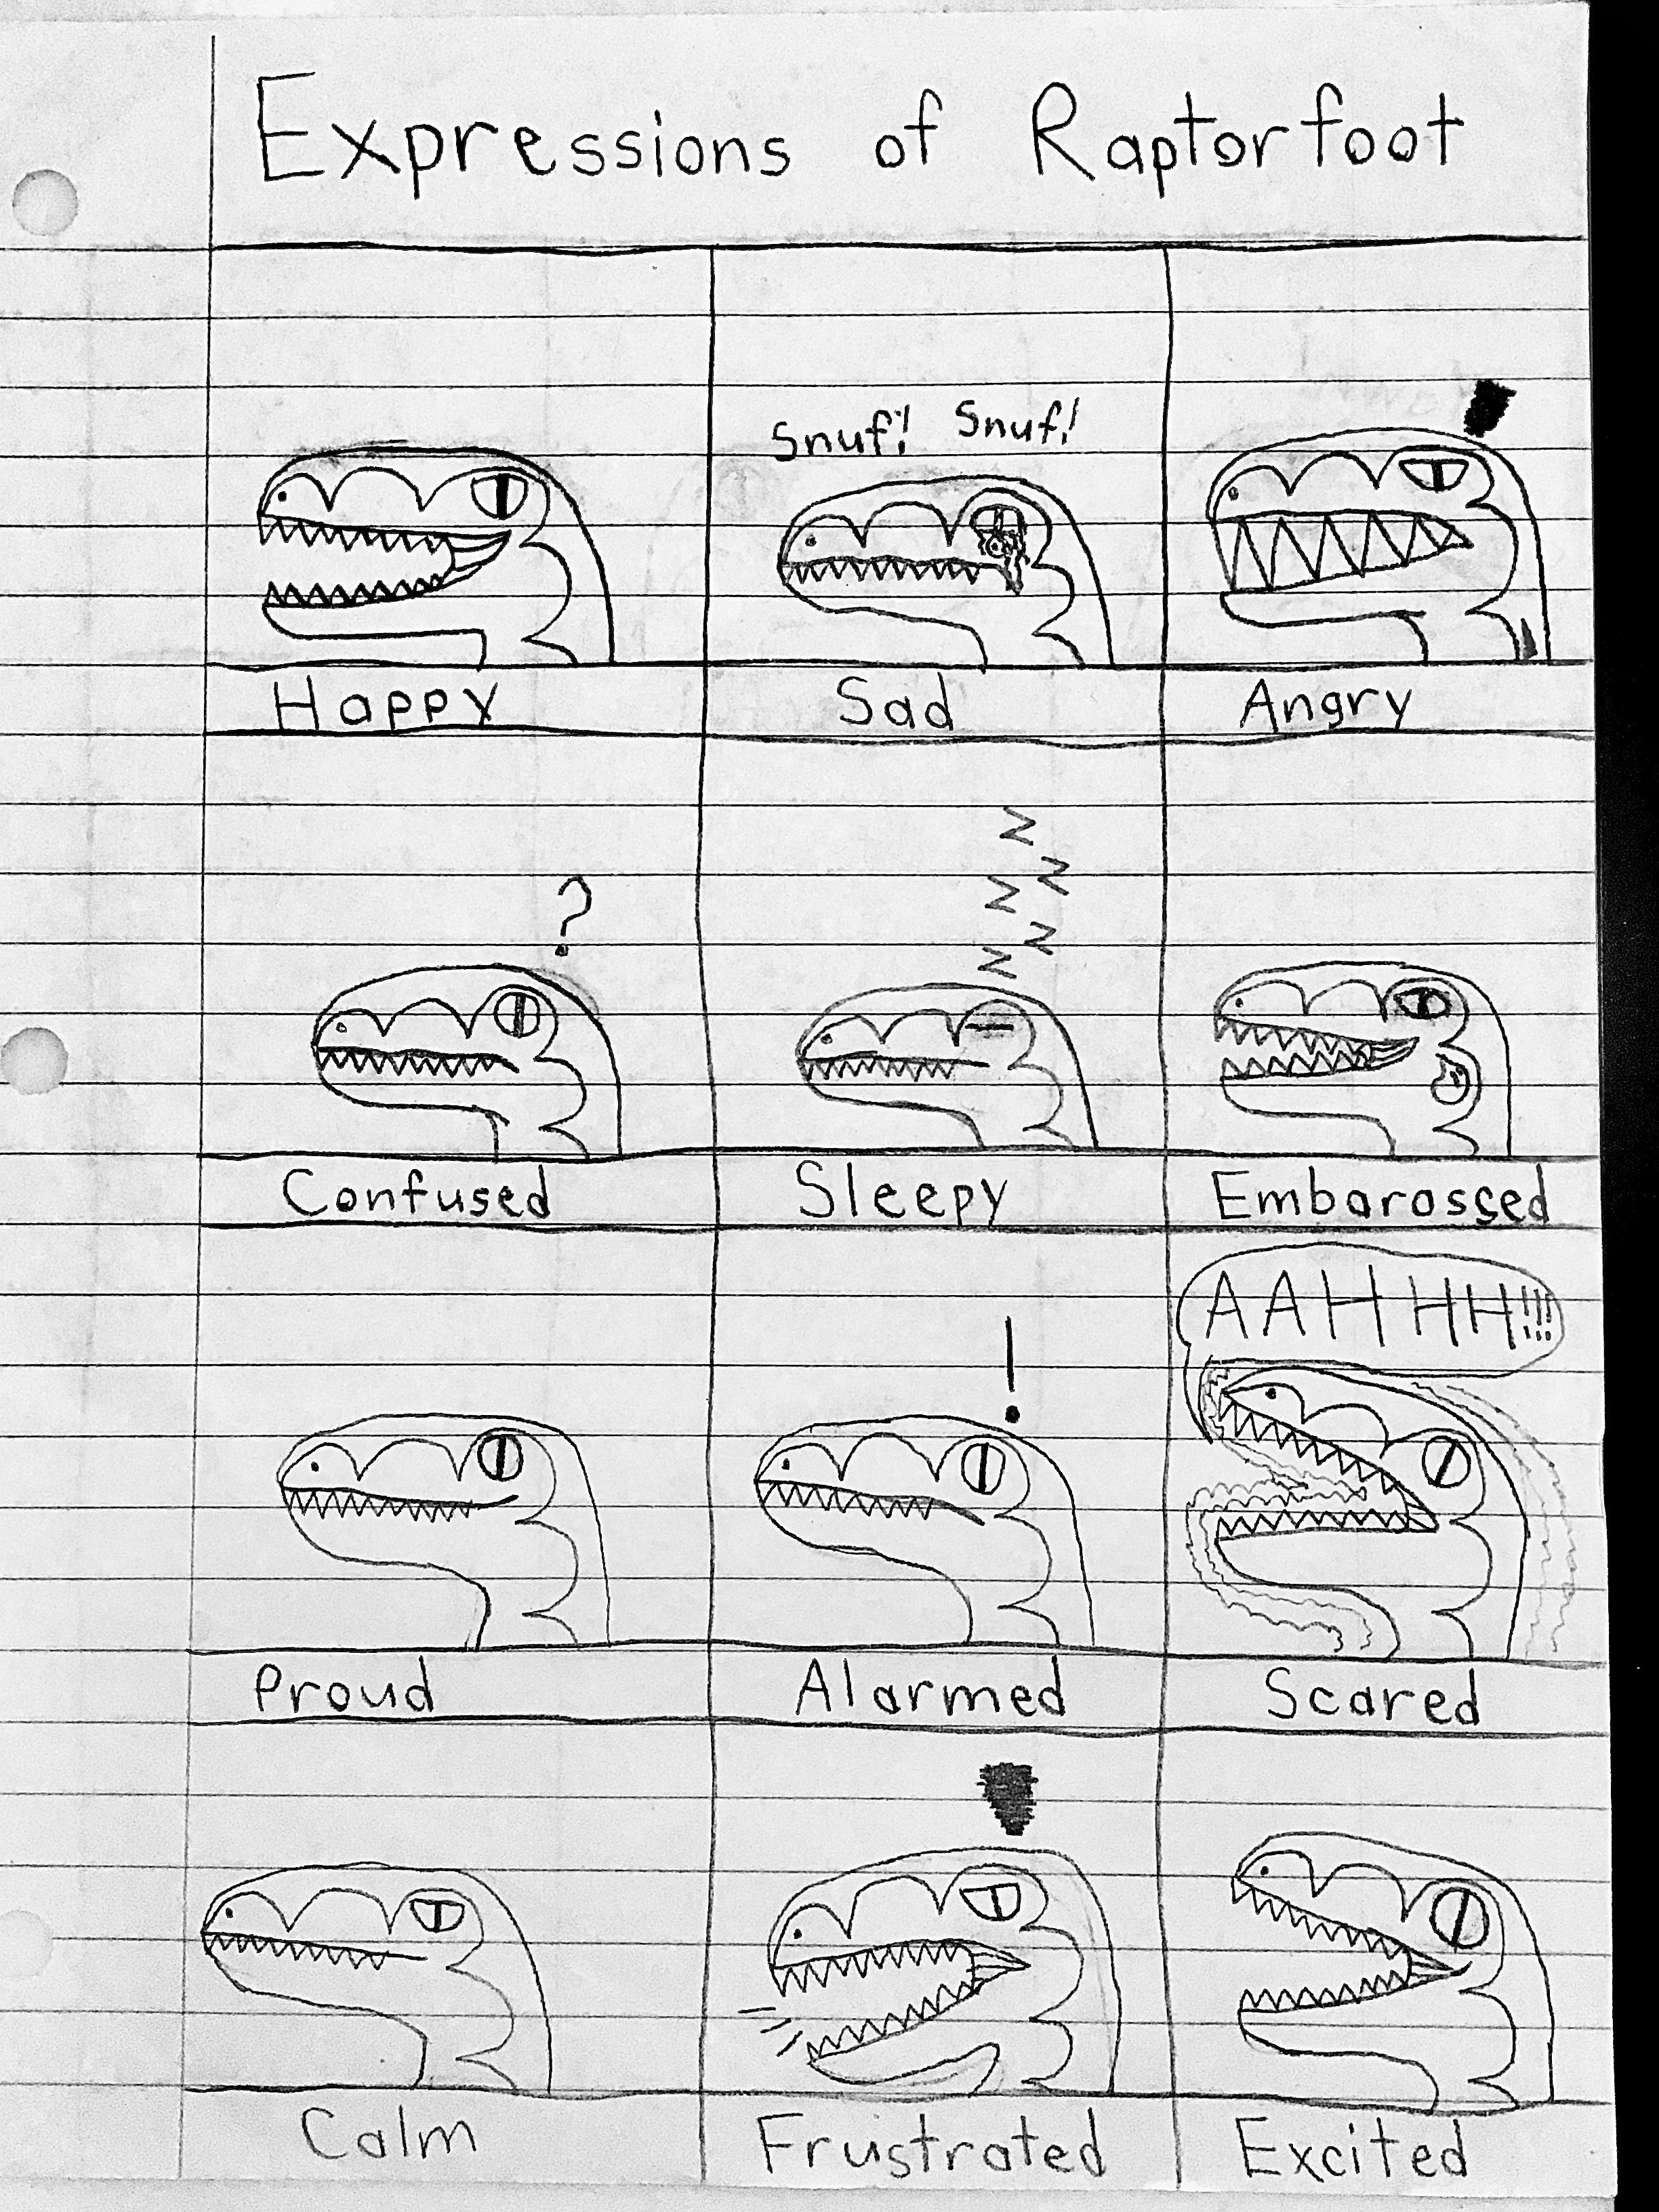 Raptorfoot Expressions (Old)